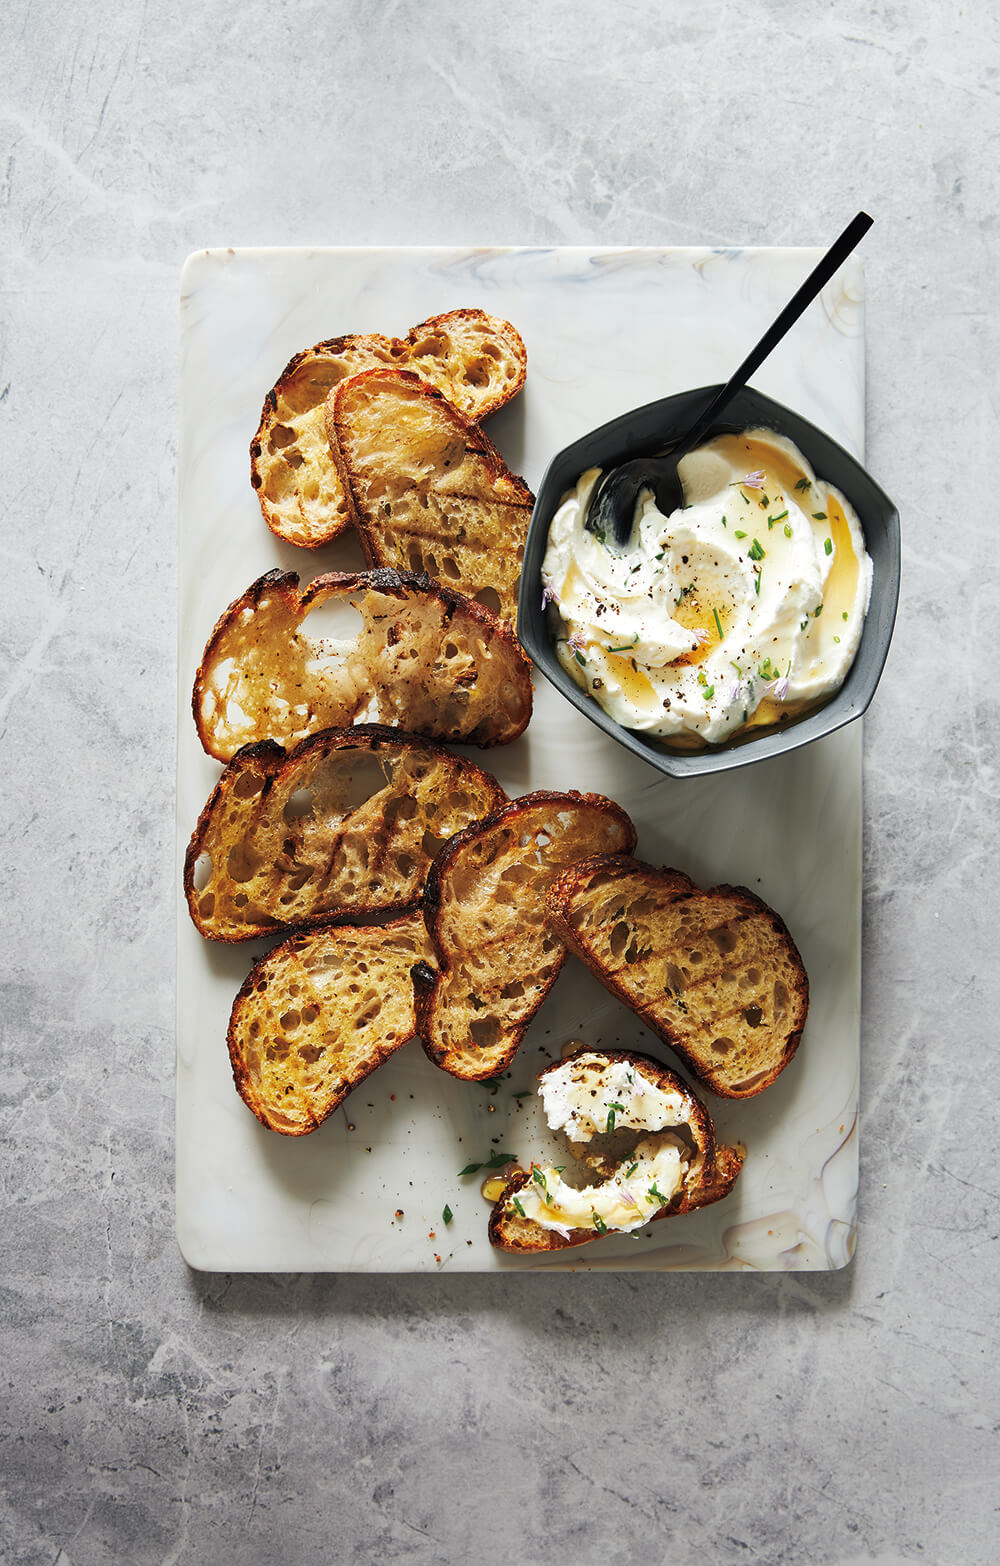 A stone surface with grilled bread and ricotta.